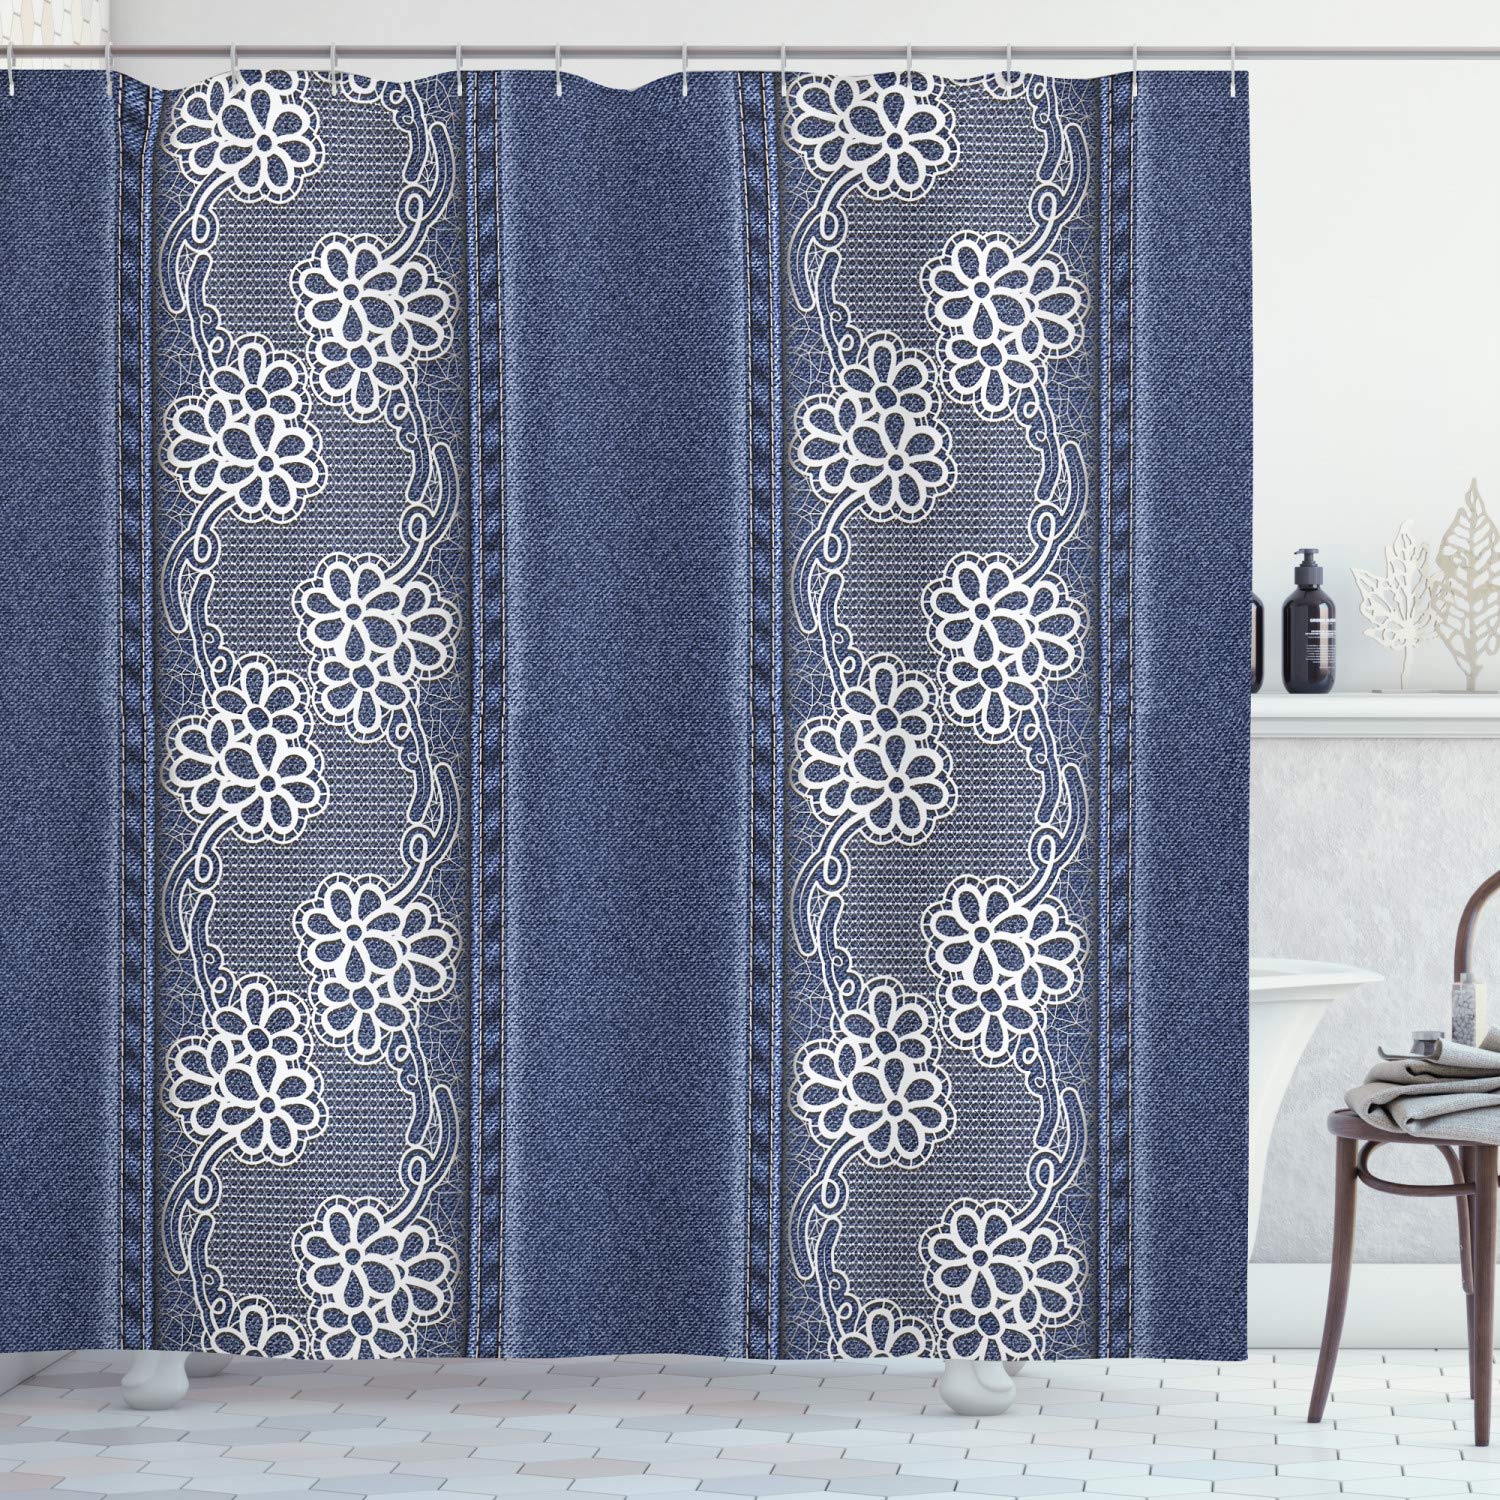 Ambesonne Floral Shower Curtain by, Blue Jeans Background with White Flower Motifs Pattern Denim Themed Digital Print, Fabric Bathroom Decor Set with Hooks, 75 Inches Long, Blue White